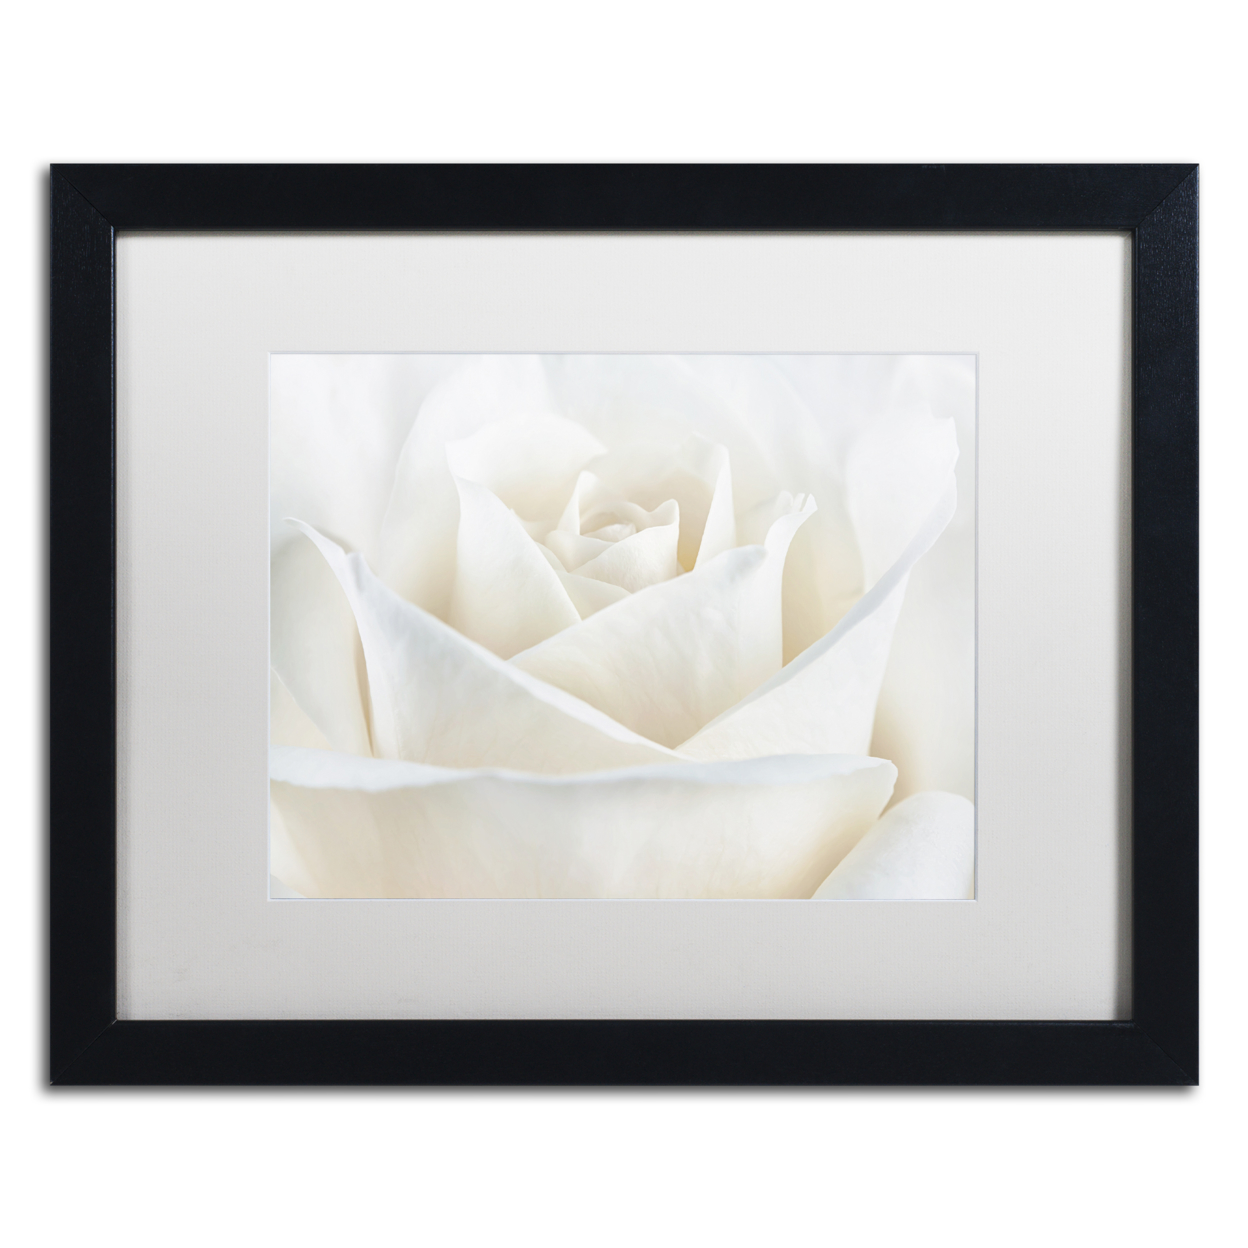 Cora Niele 'Pure White Rose' Black Wooden Framed Art 18 X 22 Inches